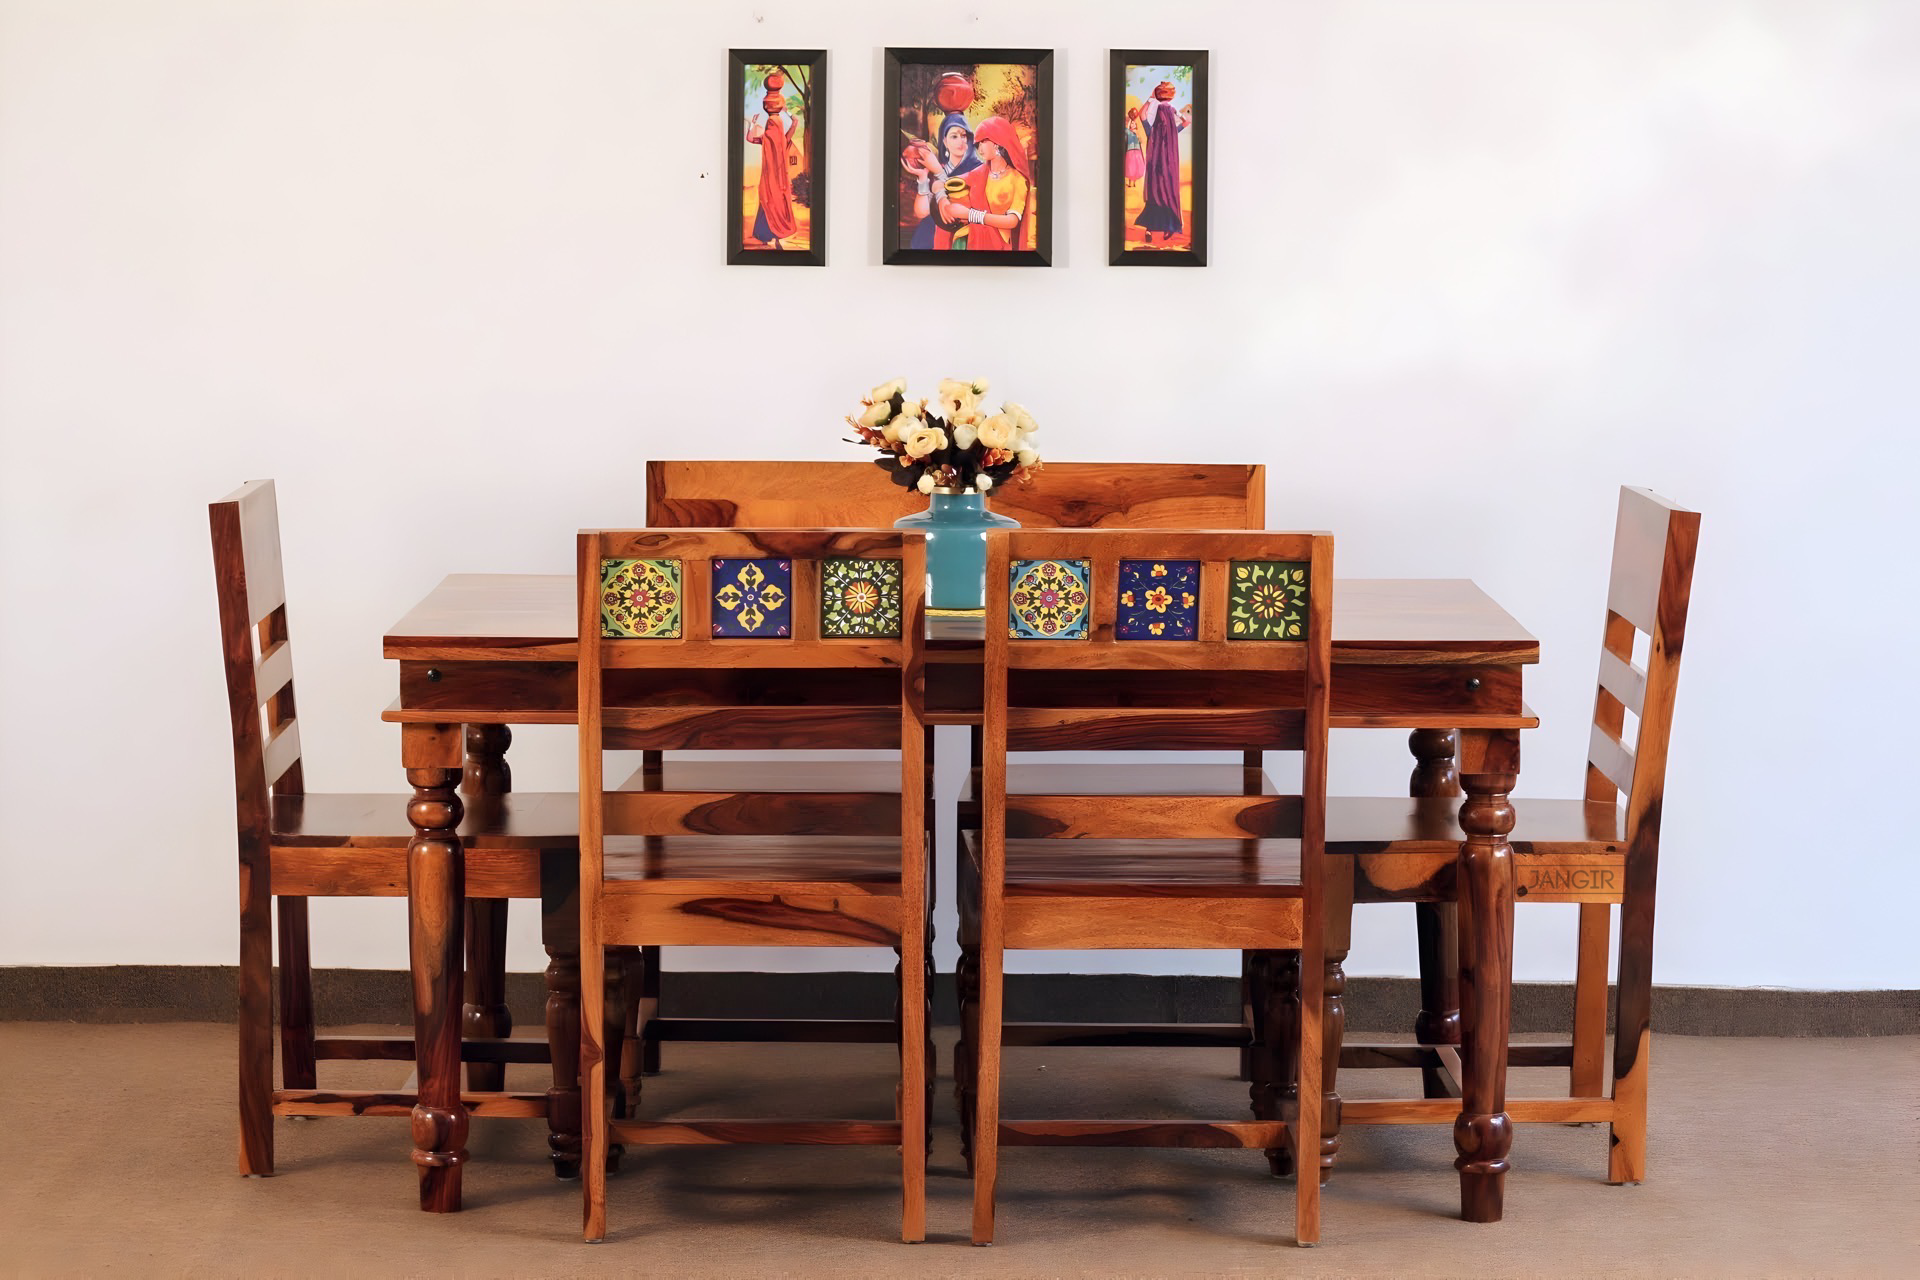 Enhance your dining area with our beautiful six seater dining table set made from sheesham wood in the tradition of Rajasthan. Experience the perfect blend of aesthetics & functionality for your home